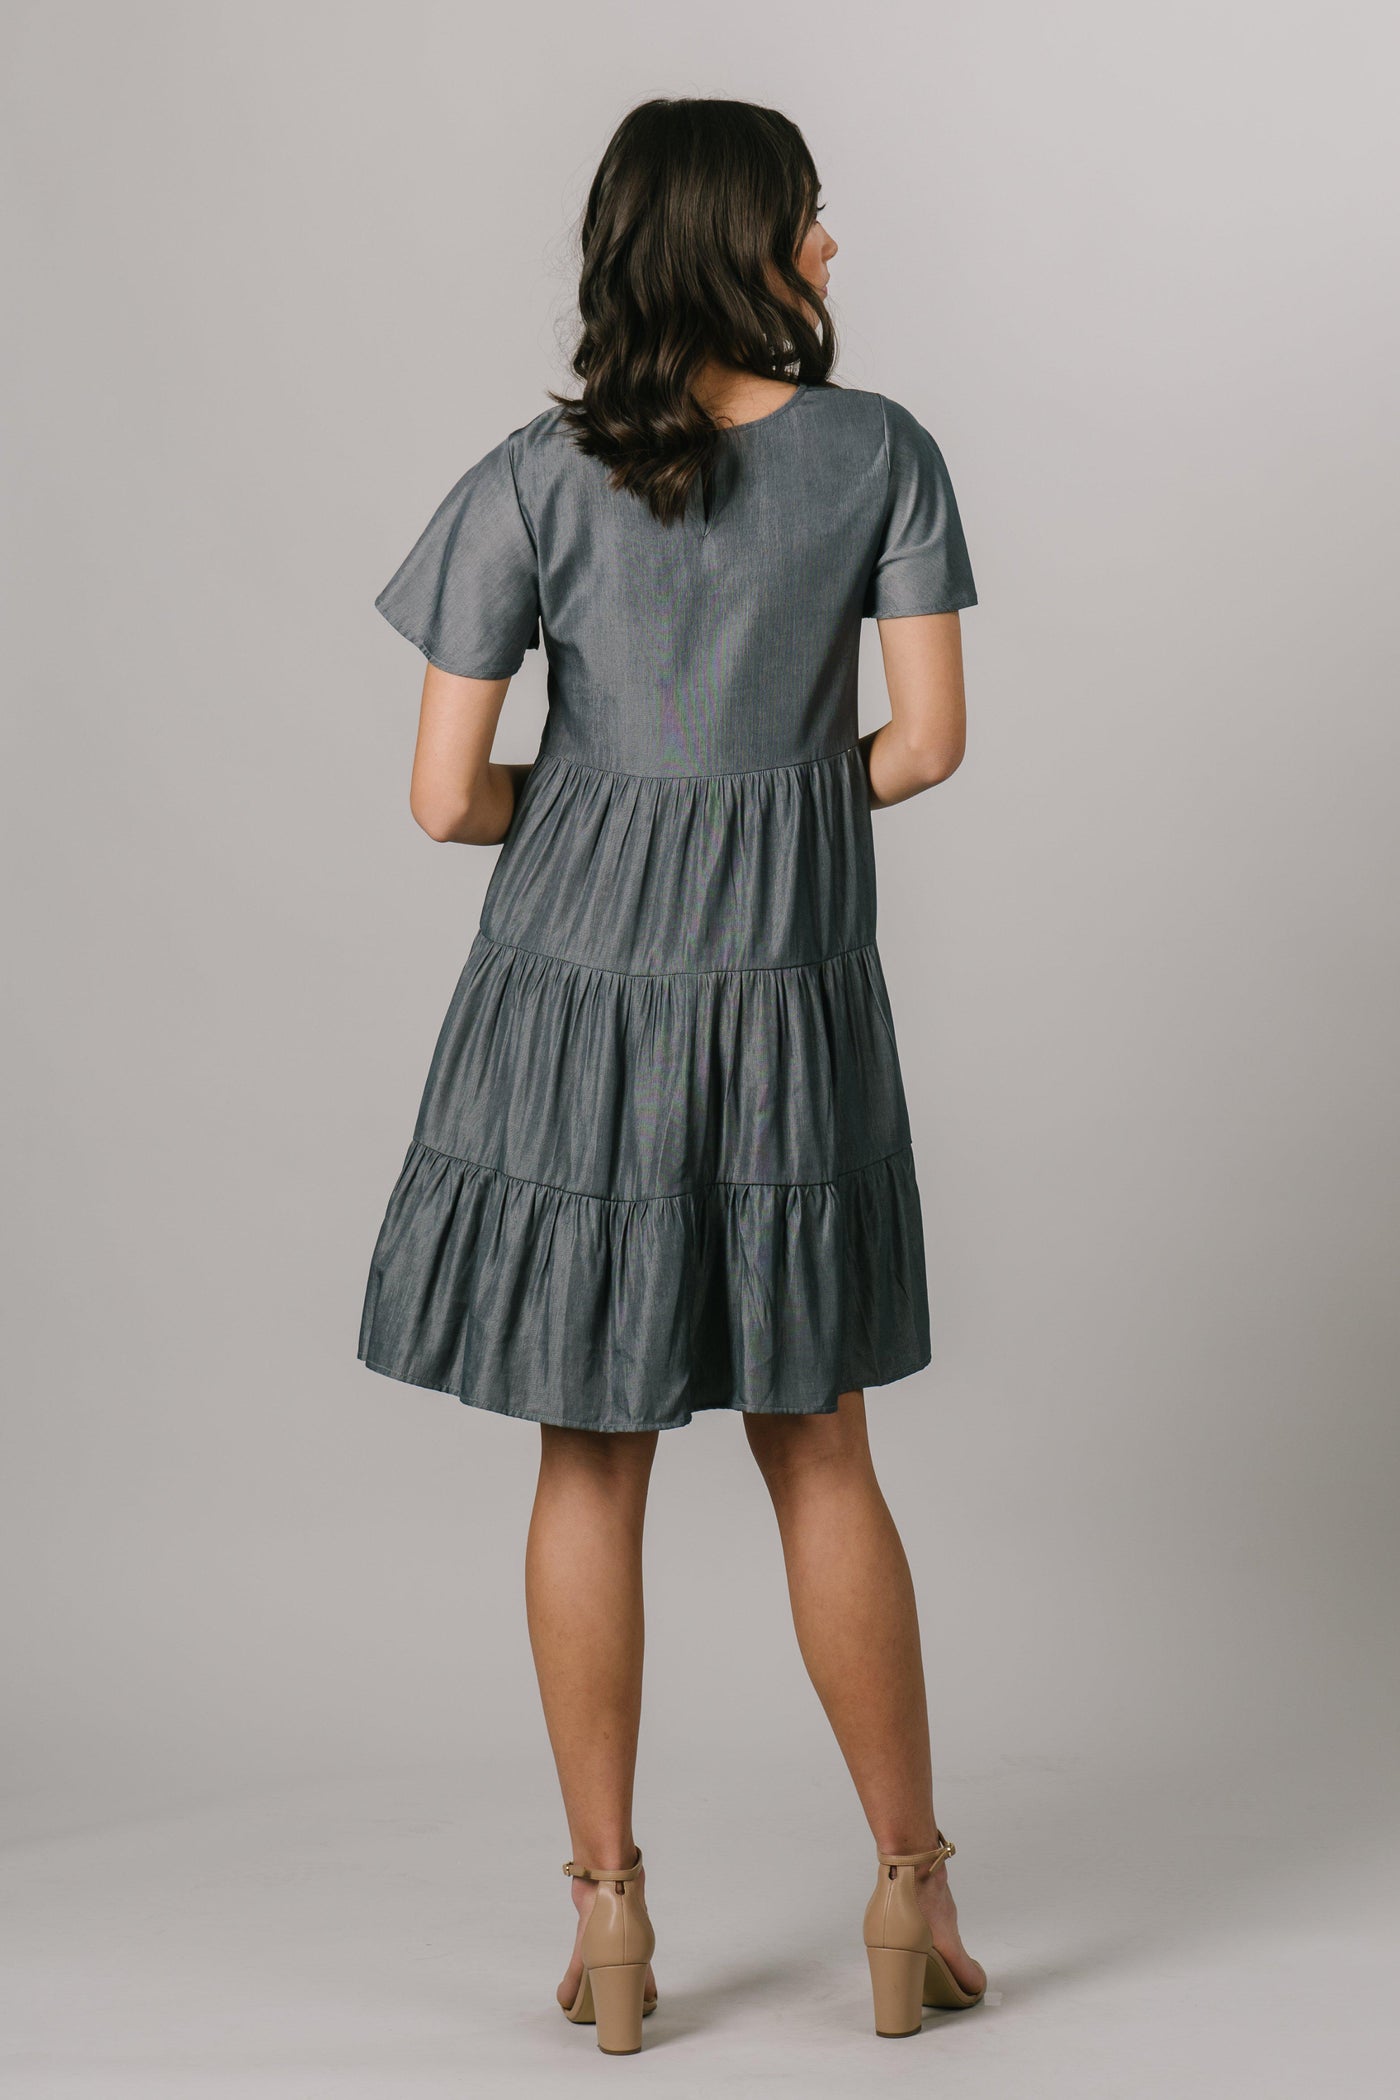 This modest bridesmaids dress has a scoop neck, short sleeves and multiple tiers that are flattering on every figure. Shown in Pine. From a dress shop called Moments Made. Modest Dresses - Modest Clothing - Everyday Modest Dresses - Bridesmaid Modest Dresses